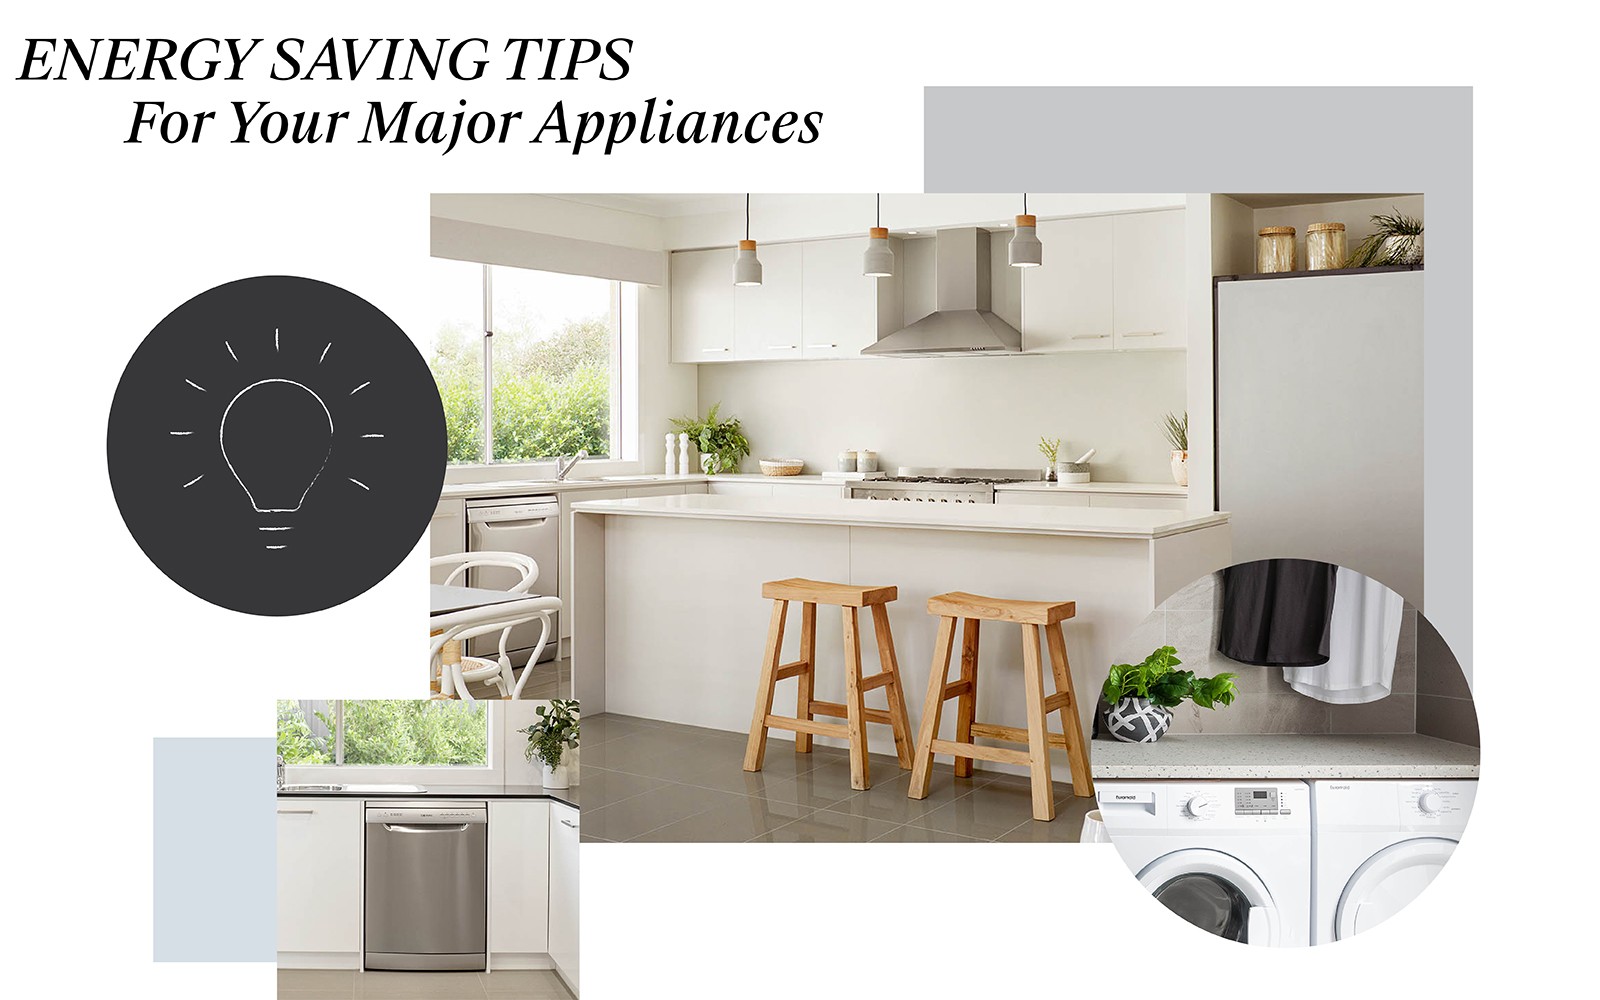 How to Run Your Appliances More Efficiently